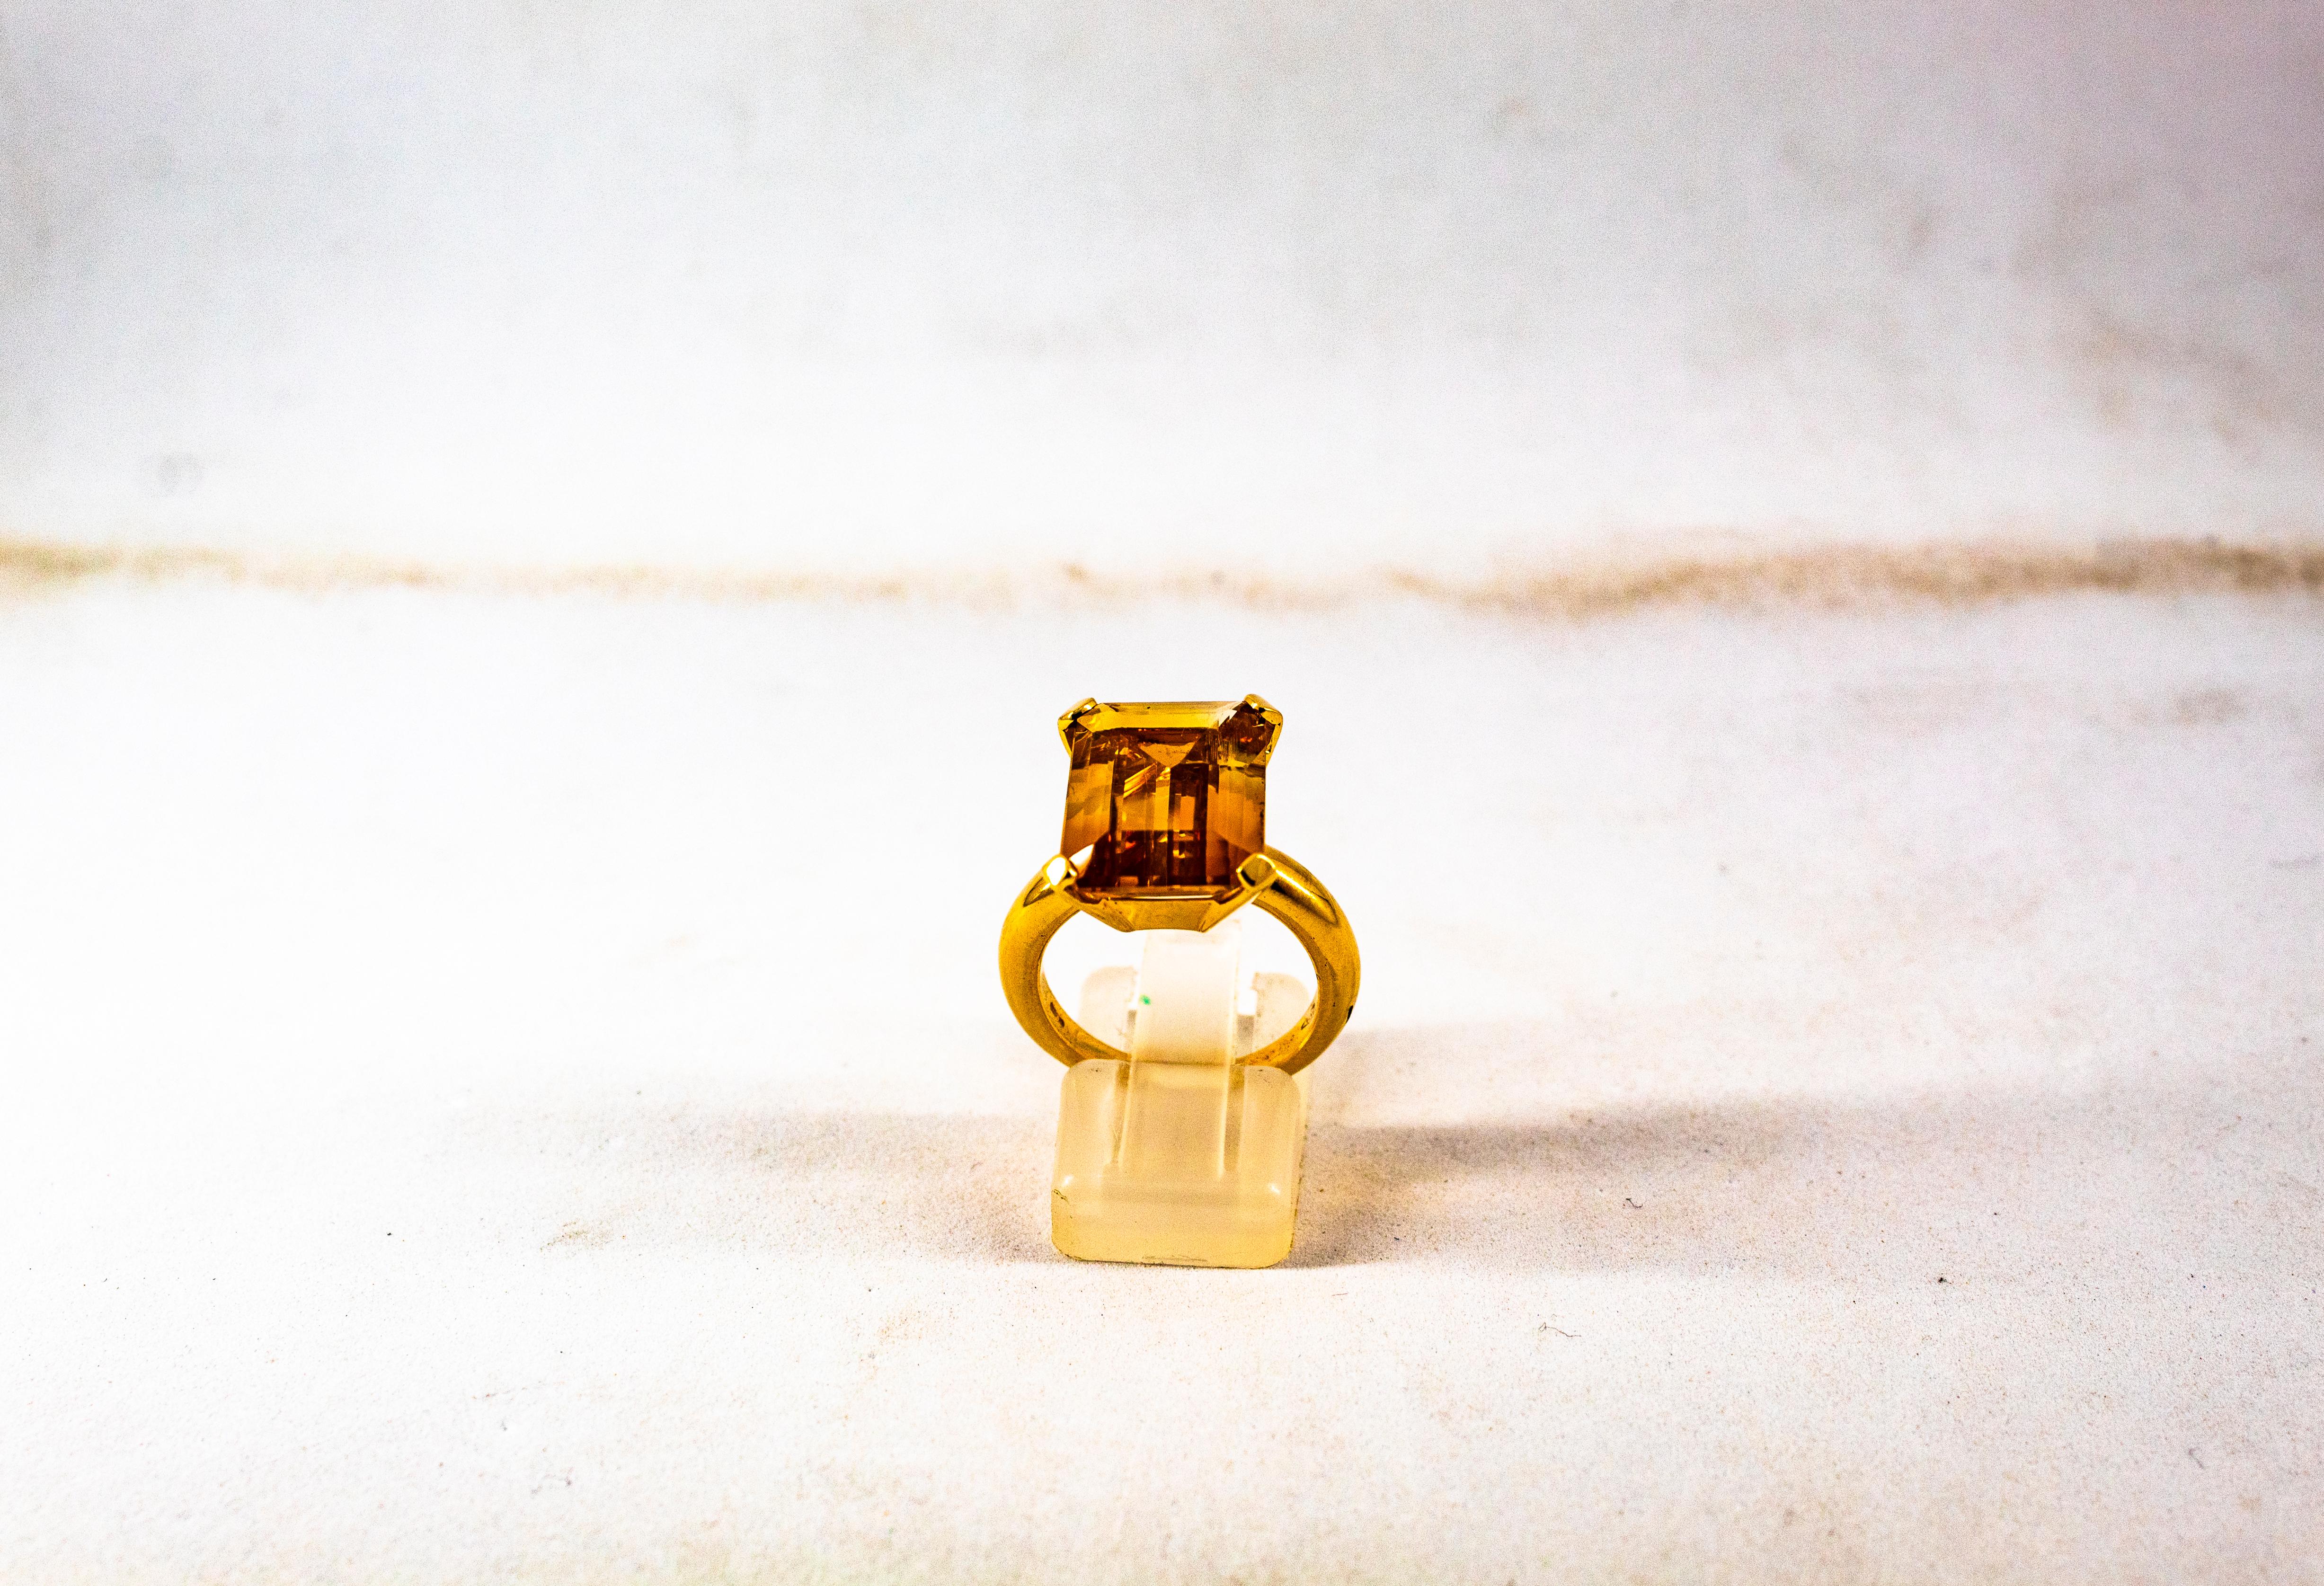 This Ring is made of 9K Yellow Gold.
This Ring has a 10.00 Carats Natural Citrine.
This Ring is inspired by Art Deco.

This Ring is available also in 14 or 18K Yellow or White Gold.
This Ring is available also with Amethyst or Blue Topaz.

Size ITA: